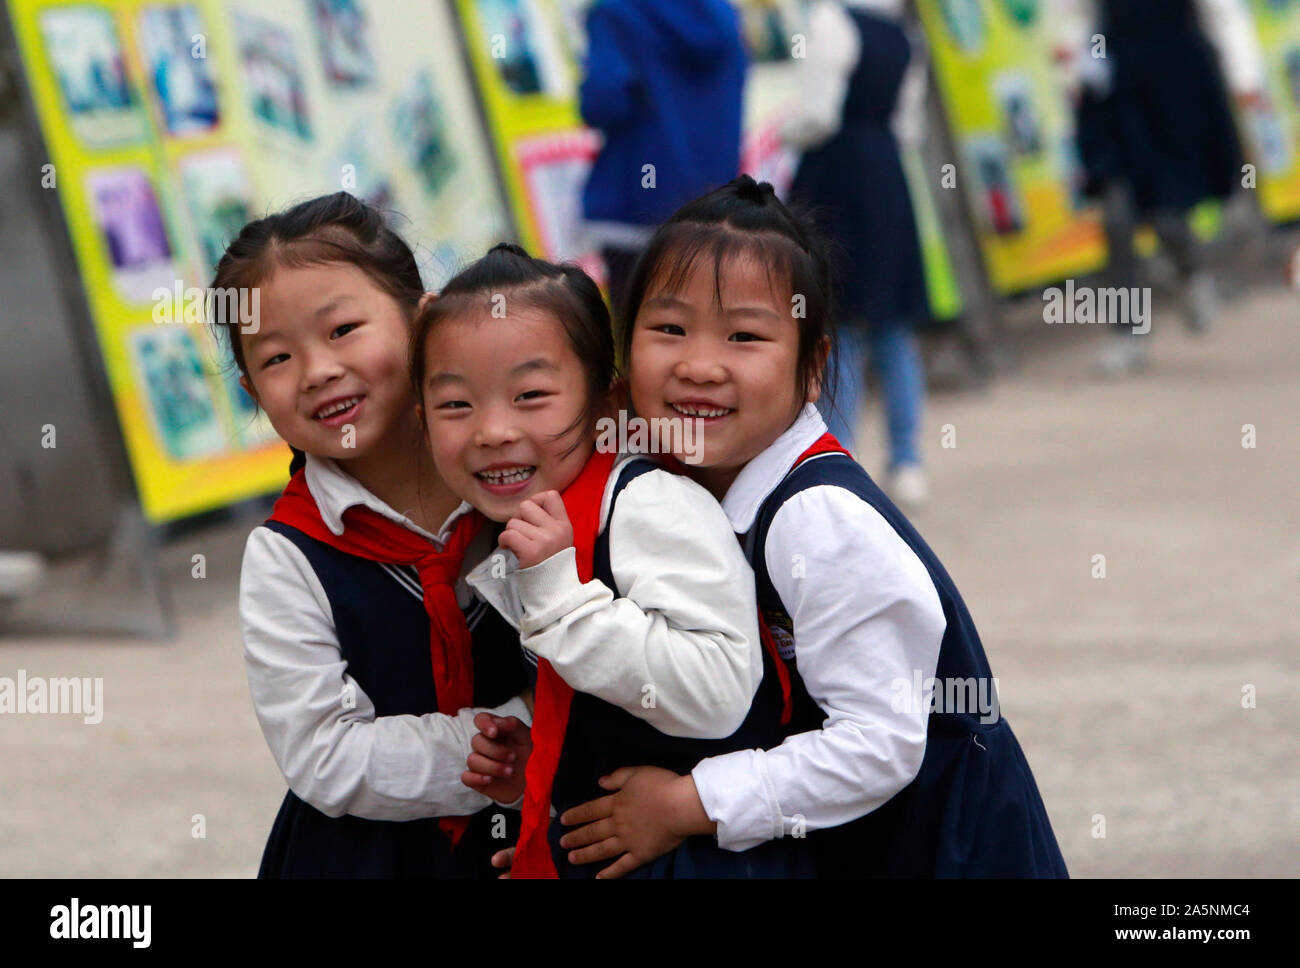 (191022) -- LUOTIAN, Oct. 22, 2019 (Xinhua) -- Students play during class break at Hope primary School in Luotian County, central China's Hubei Province, Oct. 11, 2019. Fang Rong, 29, is the headmaster of Hope primary school of Luotian County, her alma mater. Born in a poverty-stricken region, Fang Rong was a left-behind girl. Thanks to the Hope Project and people's aids, she succeeded in graduating from a secondary normal school. To help more children and repay people's kindness, she decided to be a teacher at her alma mater. In spite of the austere way of life, Fang shouldered her respo Stock Photo